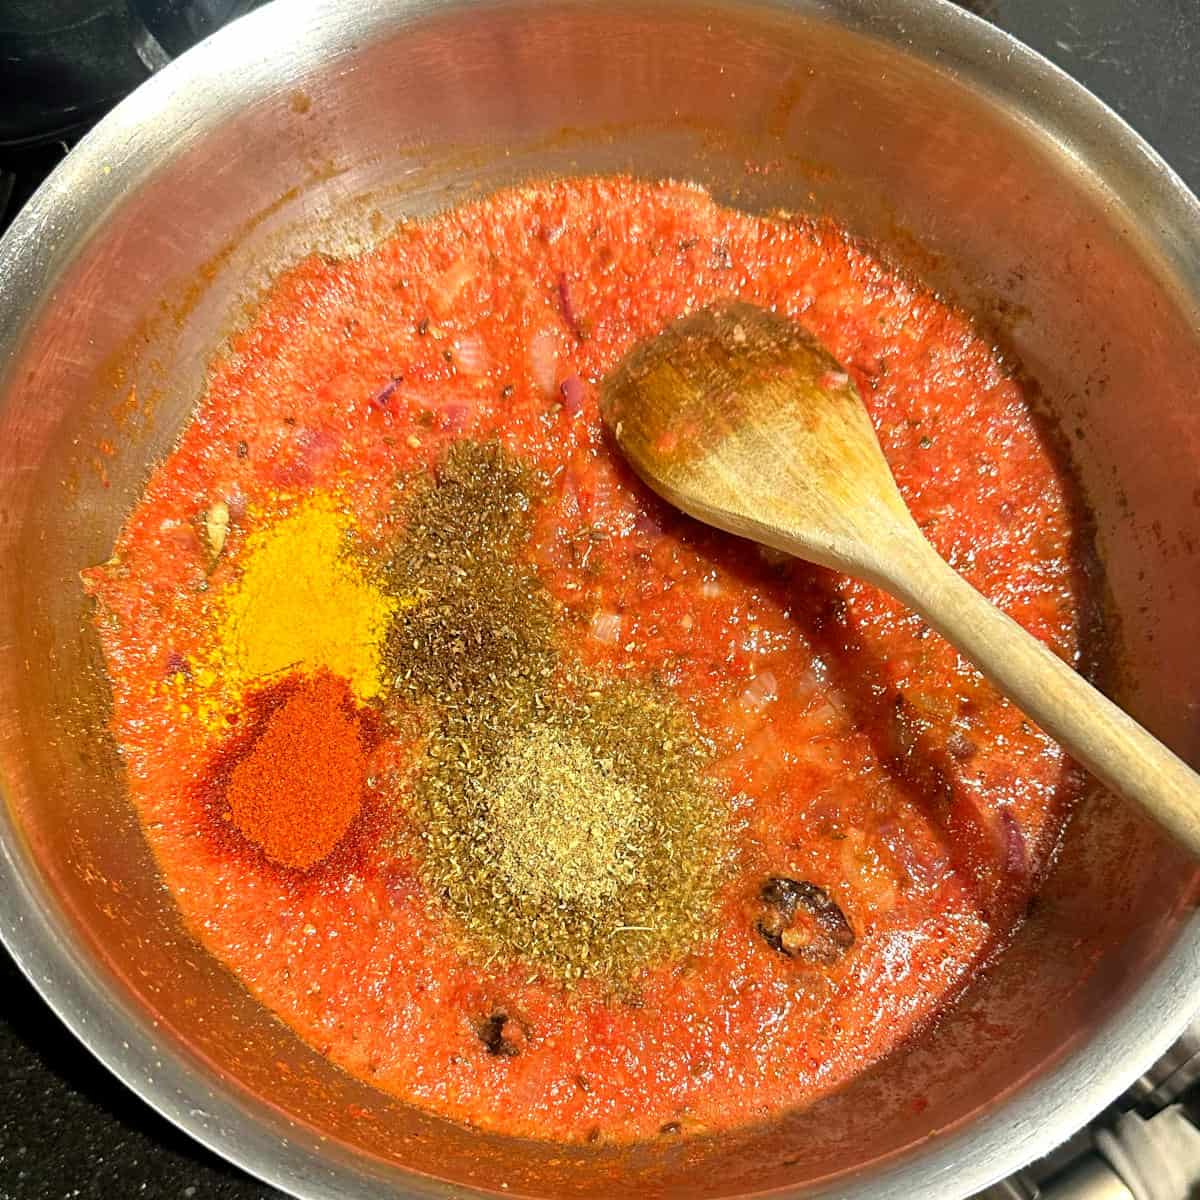 Spices added to tomatoes and onions in pot.